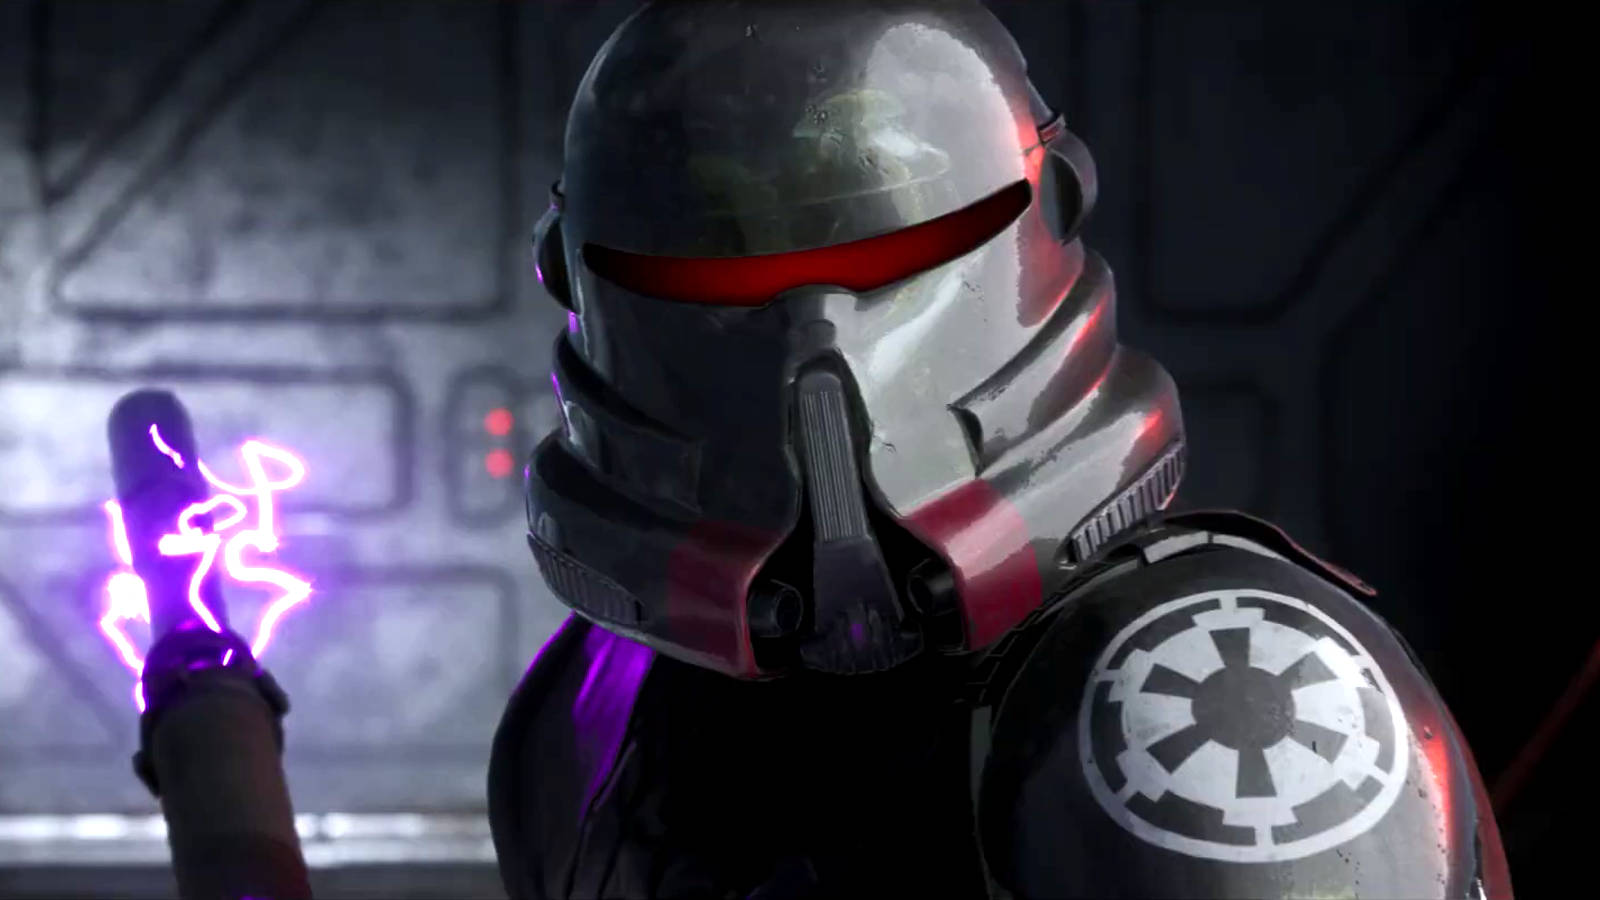 Outfitted In Dark Brown Armor, A Purge Trooper Stands Ready To Take On Any Threat. Wallpaper